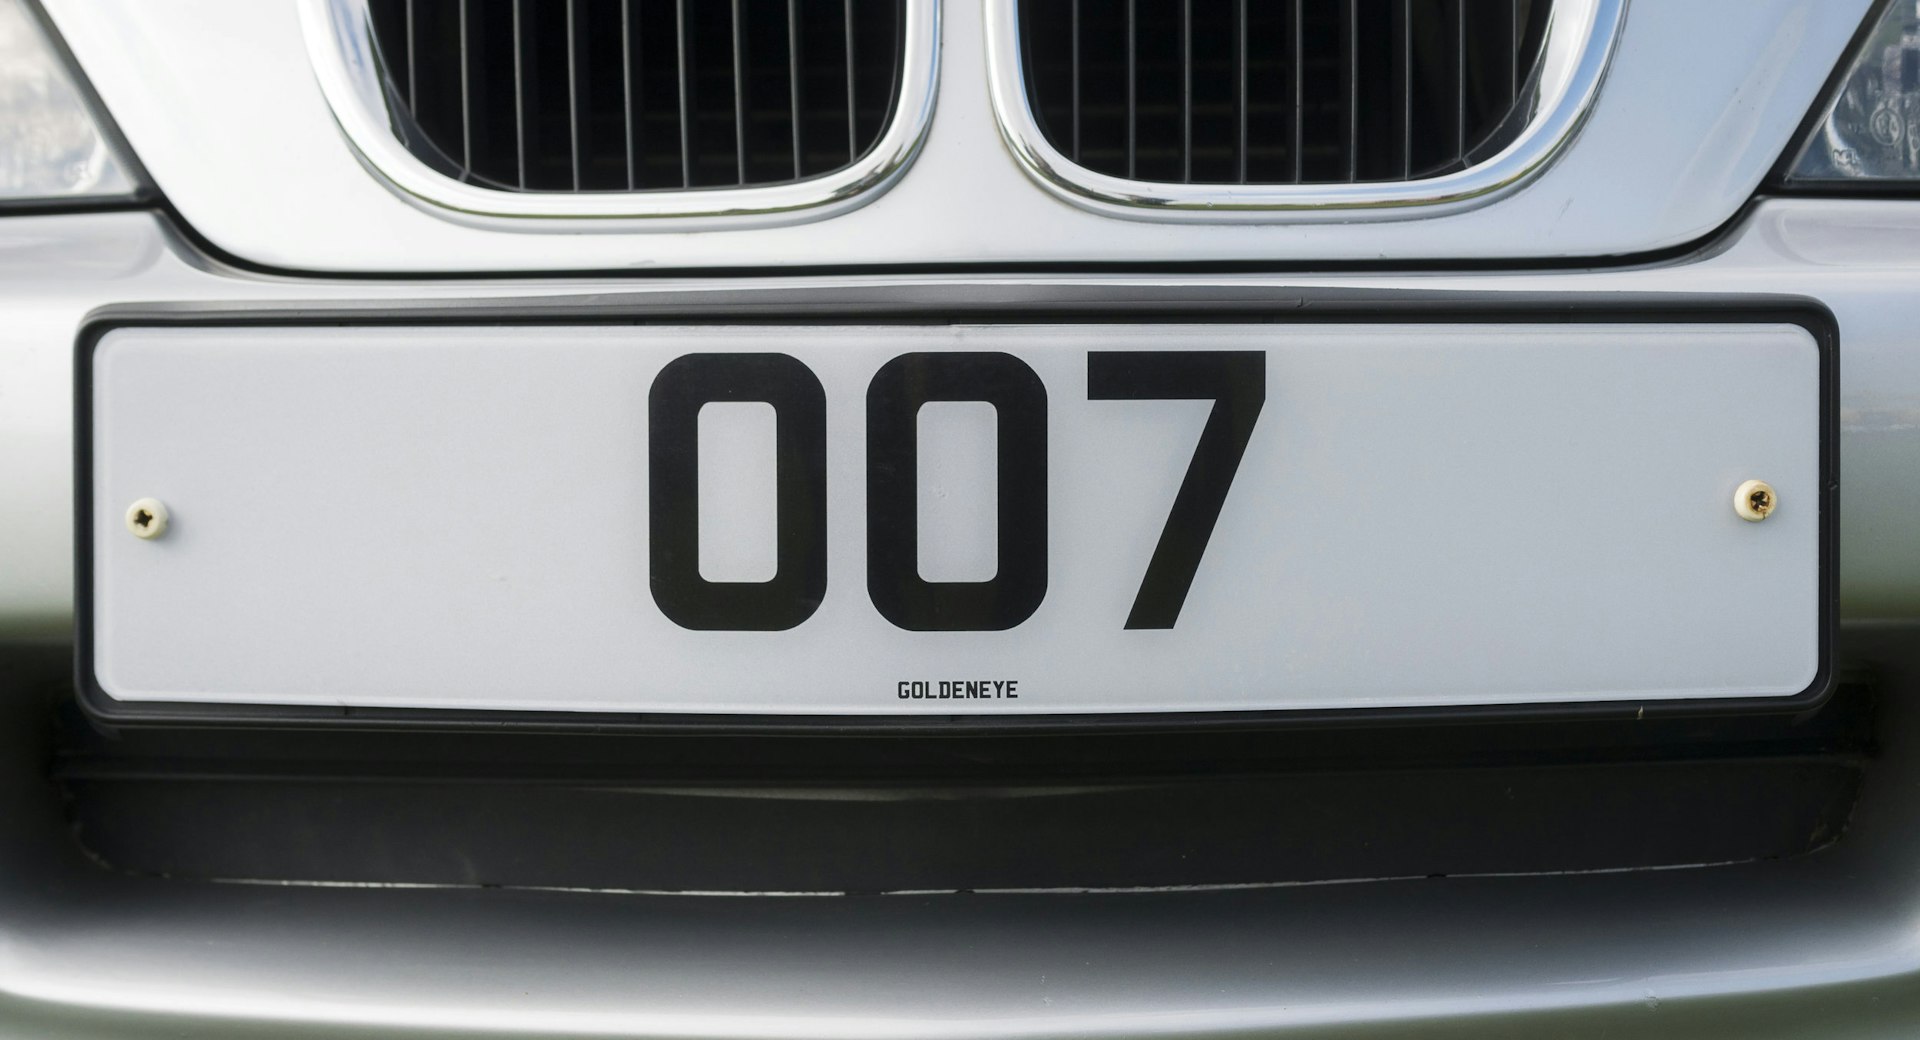 A close-up shot of a license plate on the front of a silver car that has the license plate number 007. 